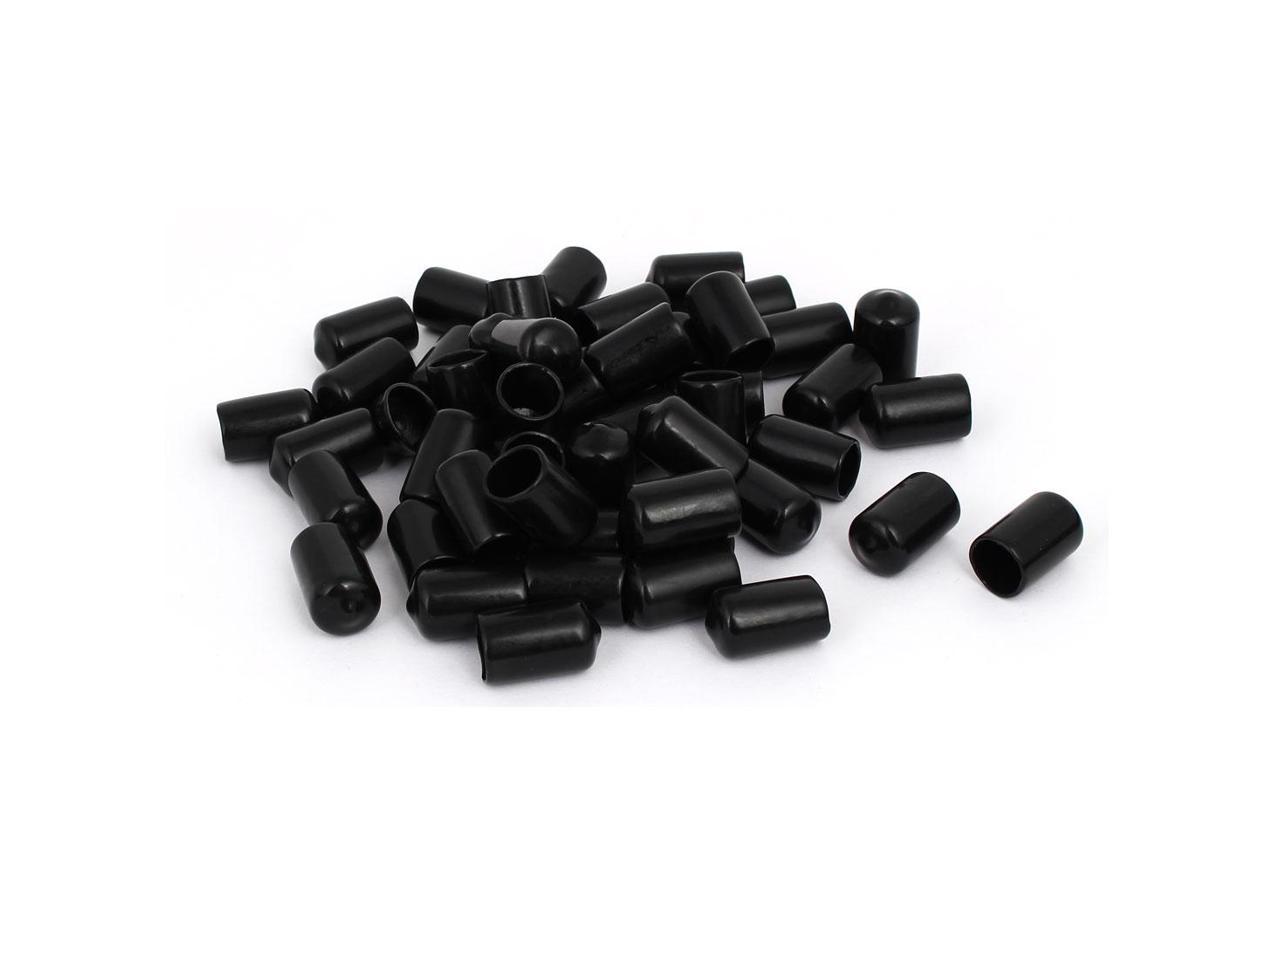 uxcell 3mm Inner Dia Rubber Hose End Cap Screw Thread Protector Cover Black 100pcs for sale online 